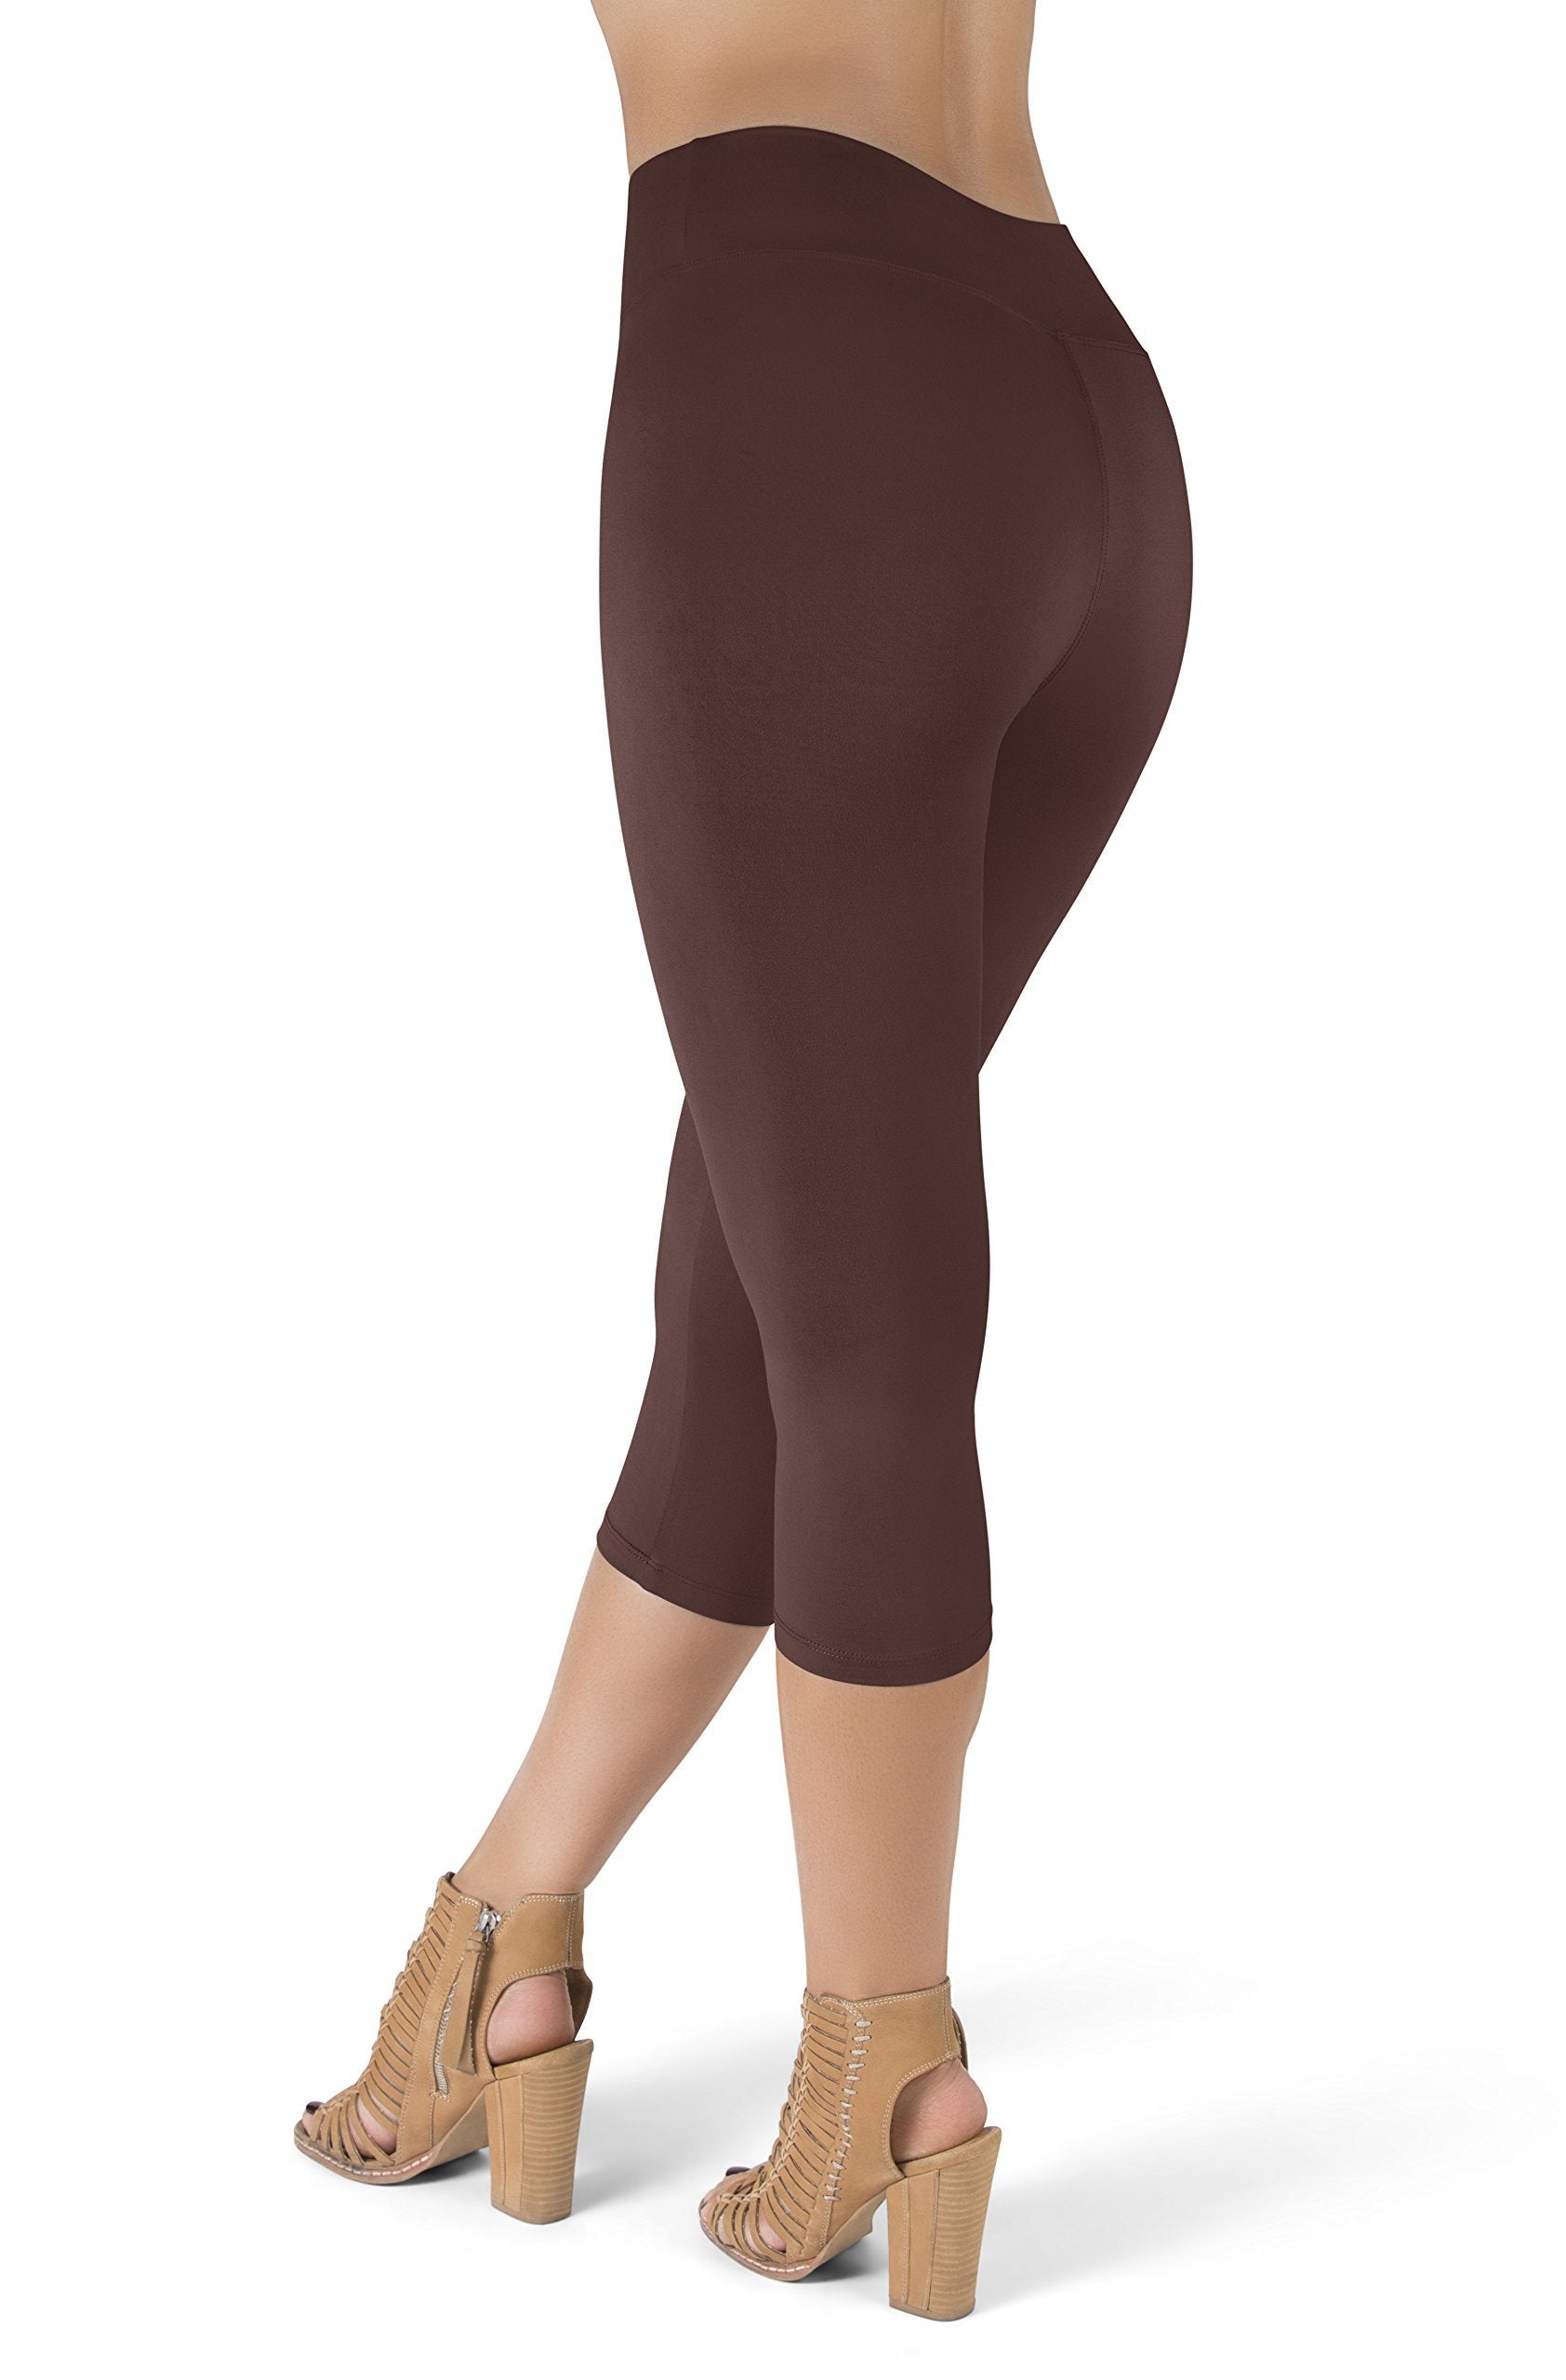 Brown SATINA High Waisted Capri Leggings for Women - Tummy Control | 3 Inch Waistband | One Size